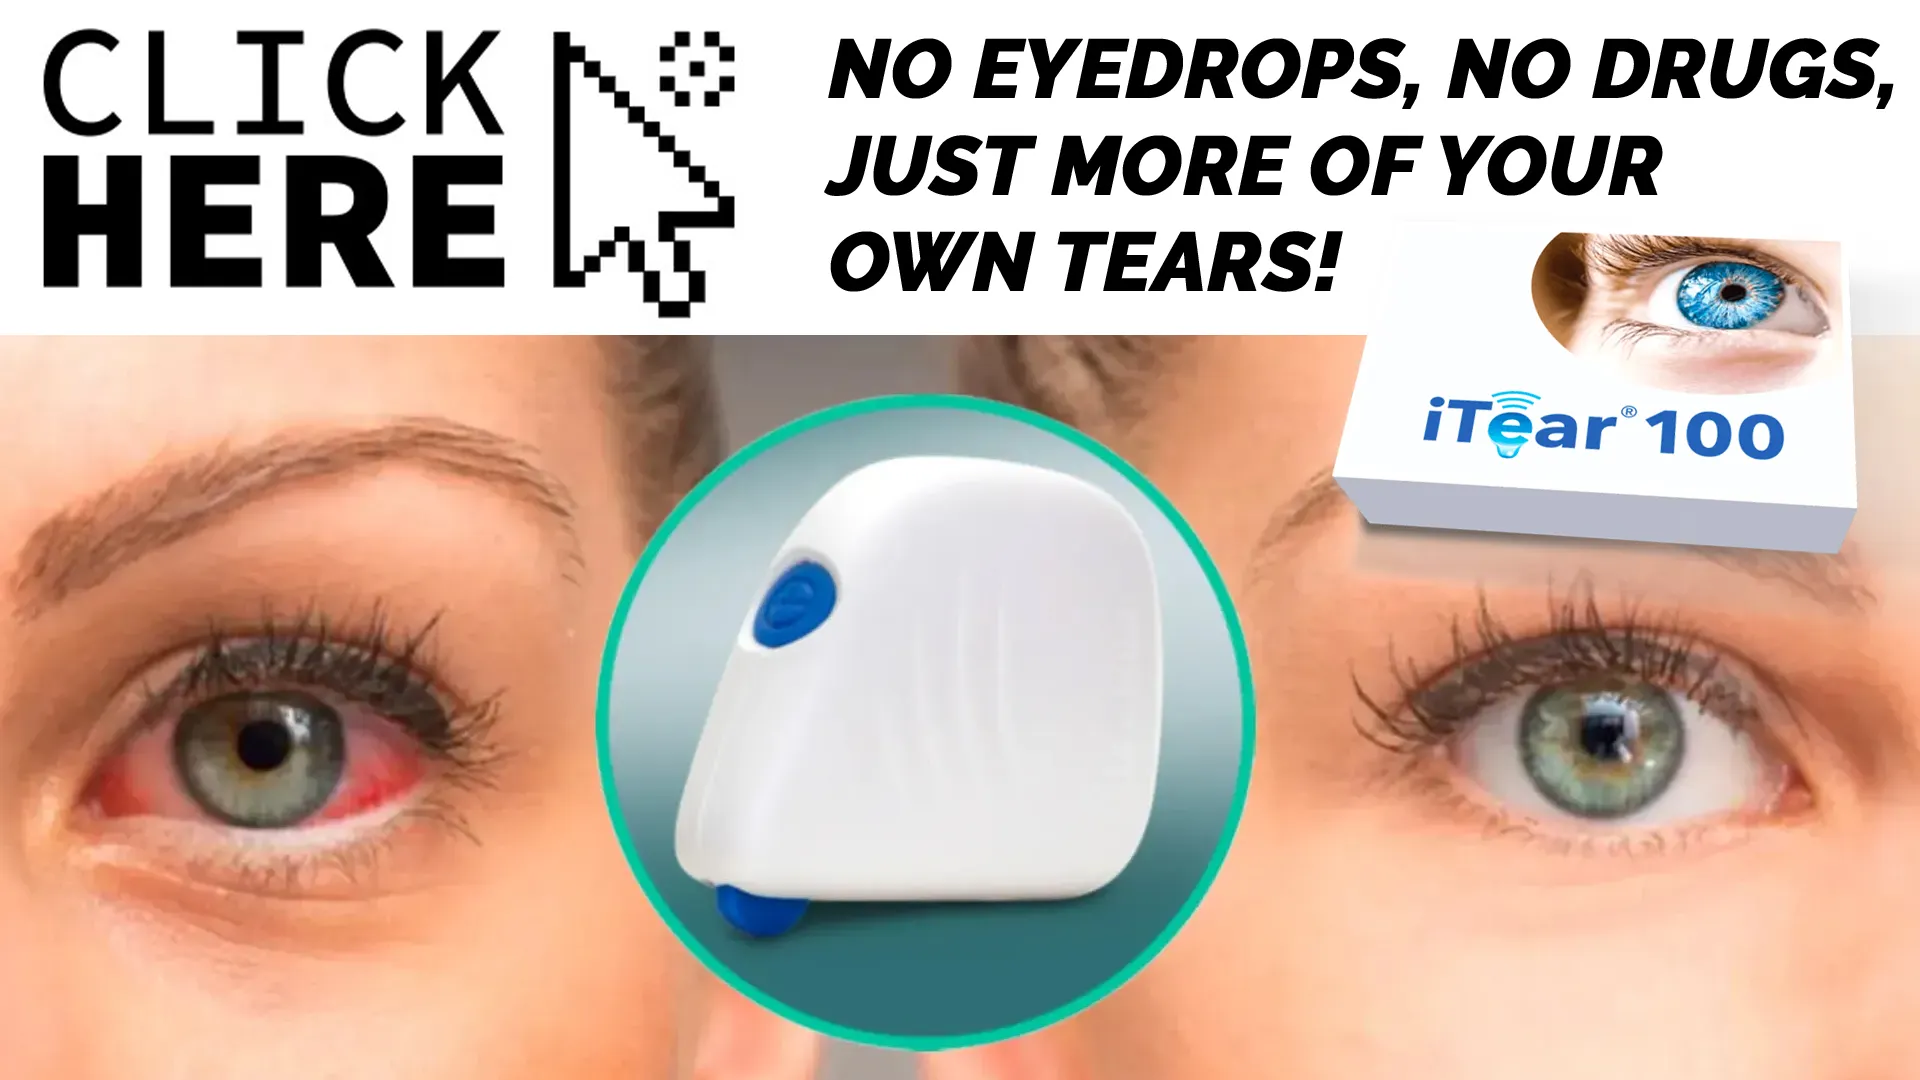 Advantages of iTear100 Over Traditional Eye Drops